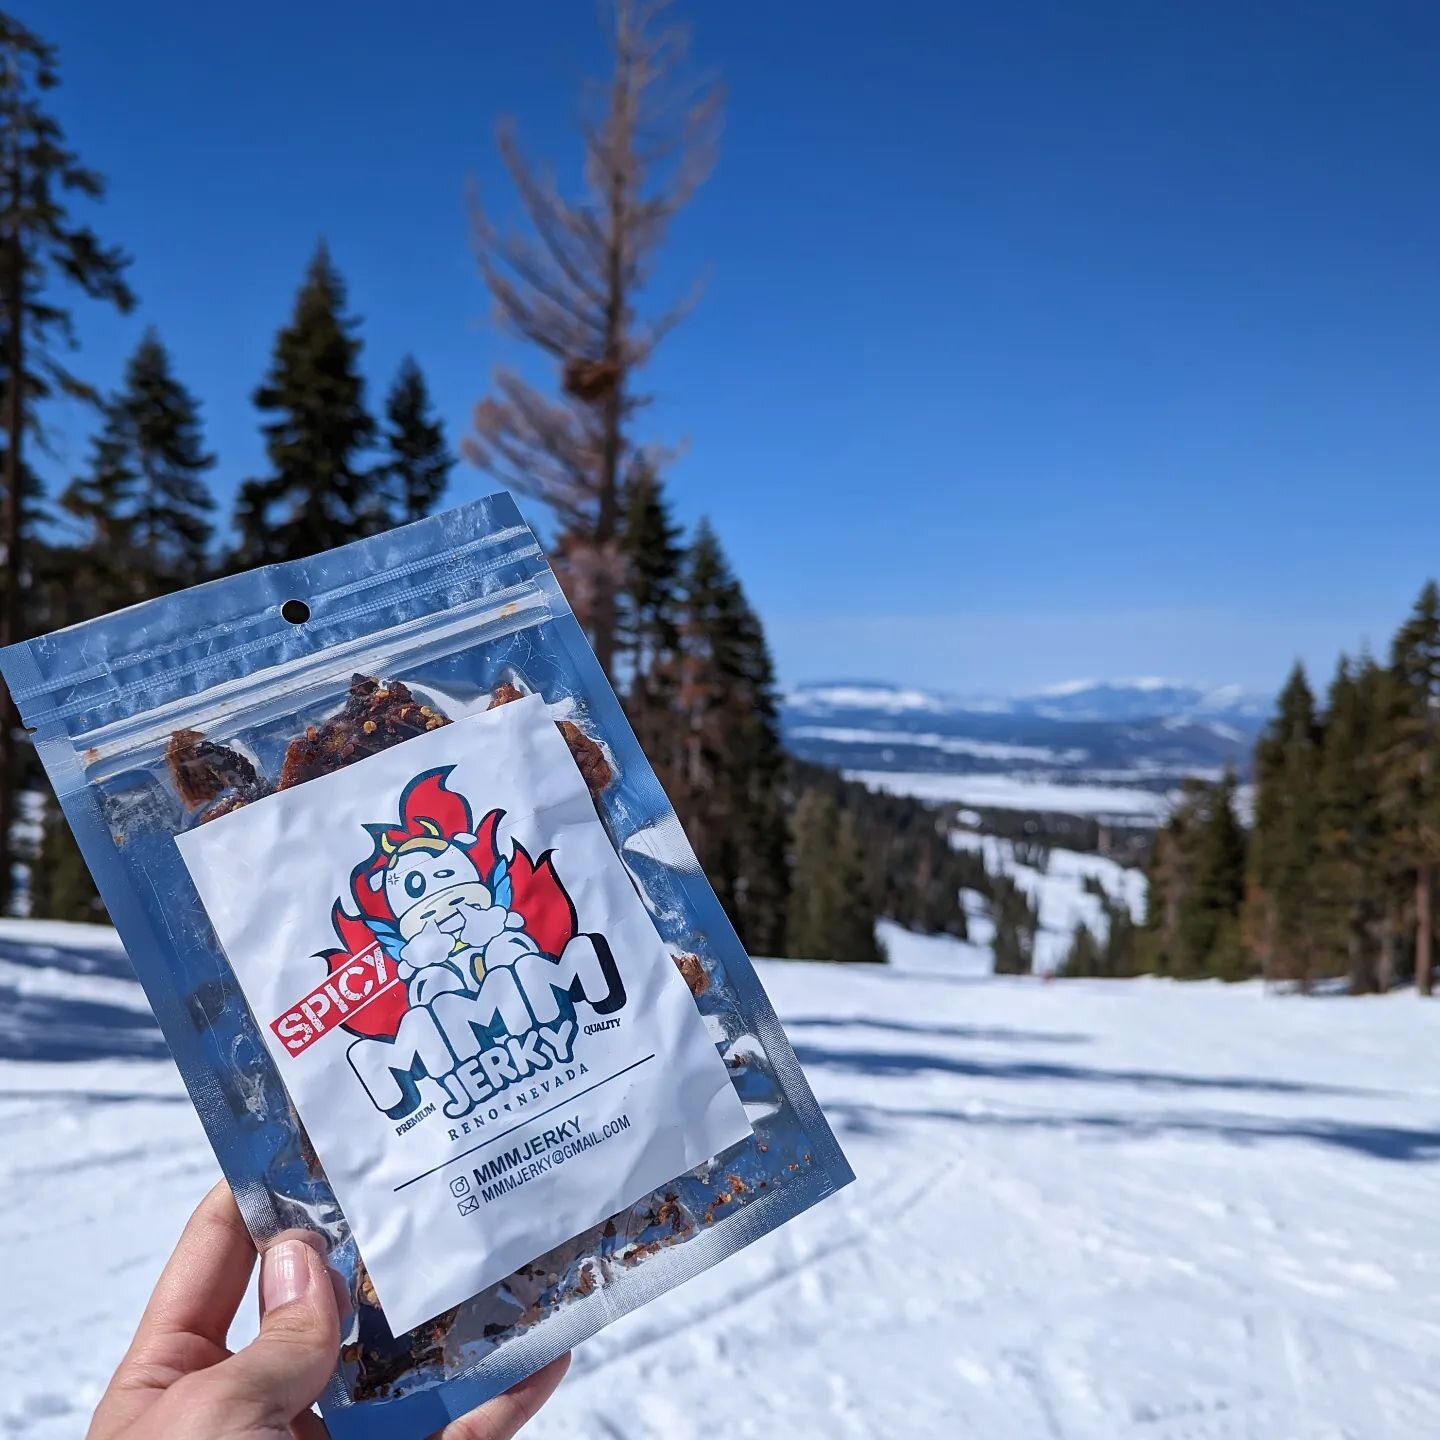 Can you believe there's still snow on the mountains?! 
#MMMJerky #MadeInNevada #RenoNevada #JerkyChips #USDAPrimeBeef #SnowboardingWithJerky #Jerky #BeefJerky